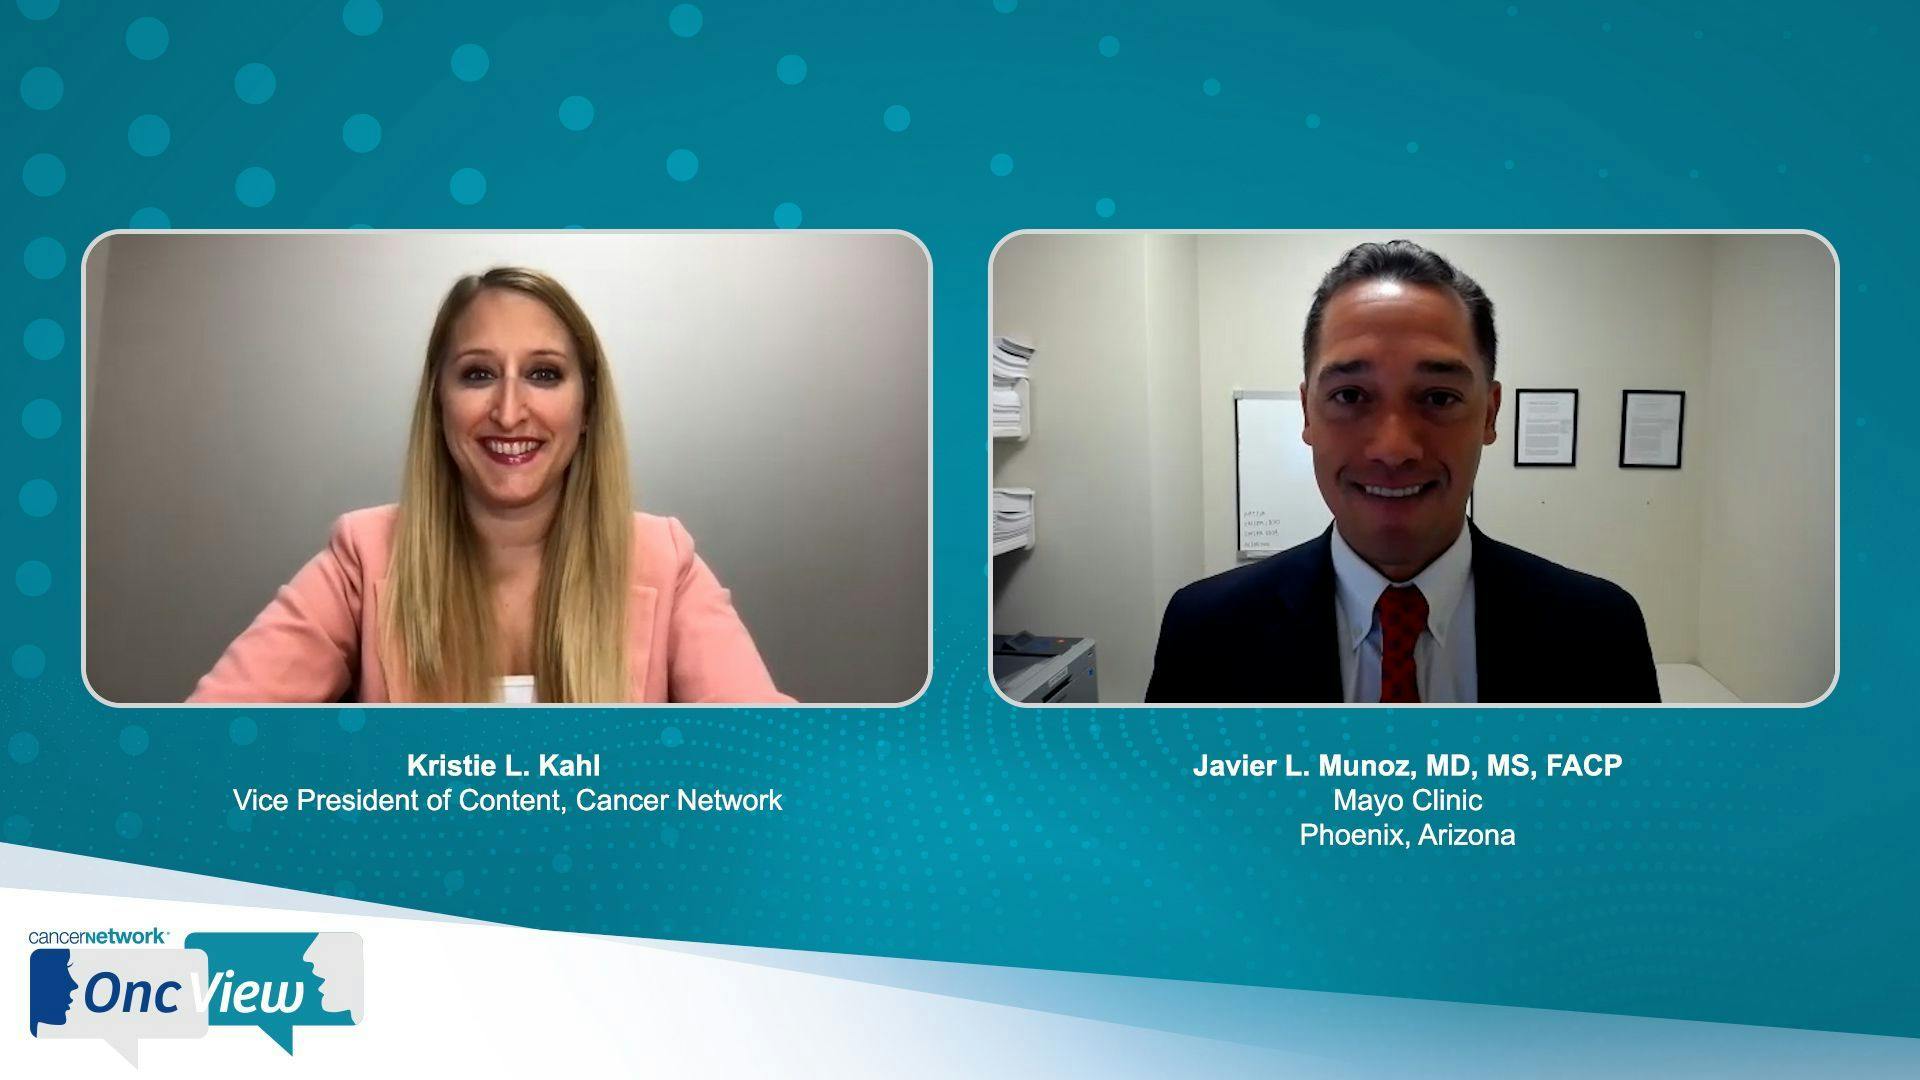 CAR T and Other Options for Relapsed/Refractory Follicular Lymphoma: Javier L. Munoz, MD, MS, FACP